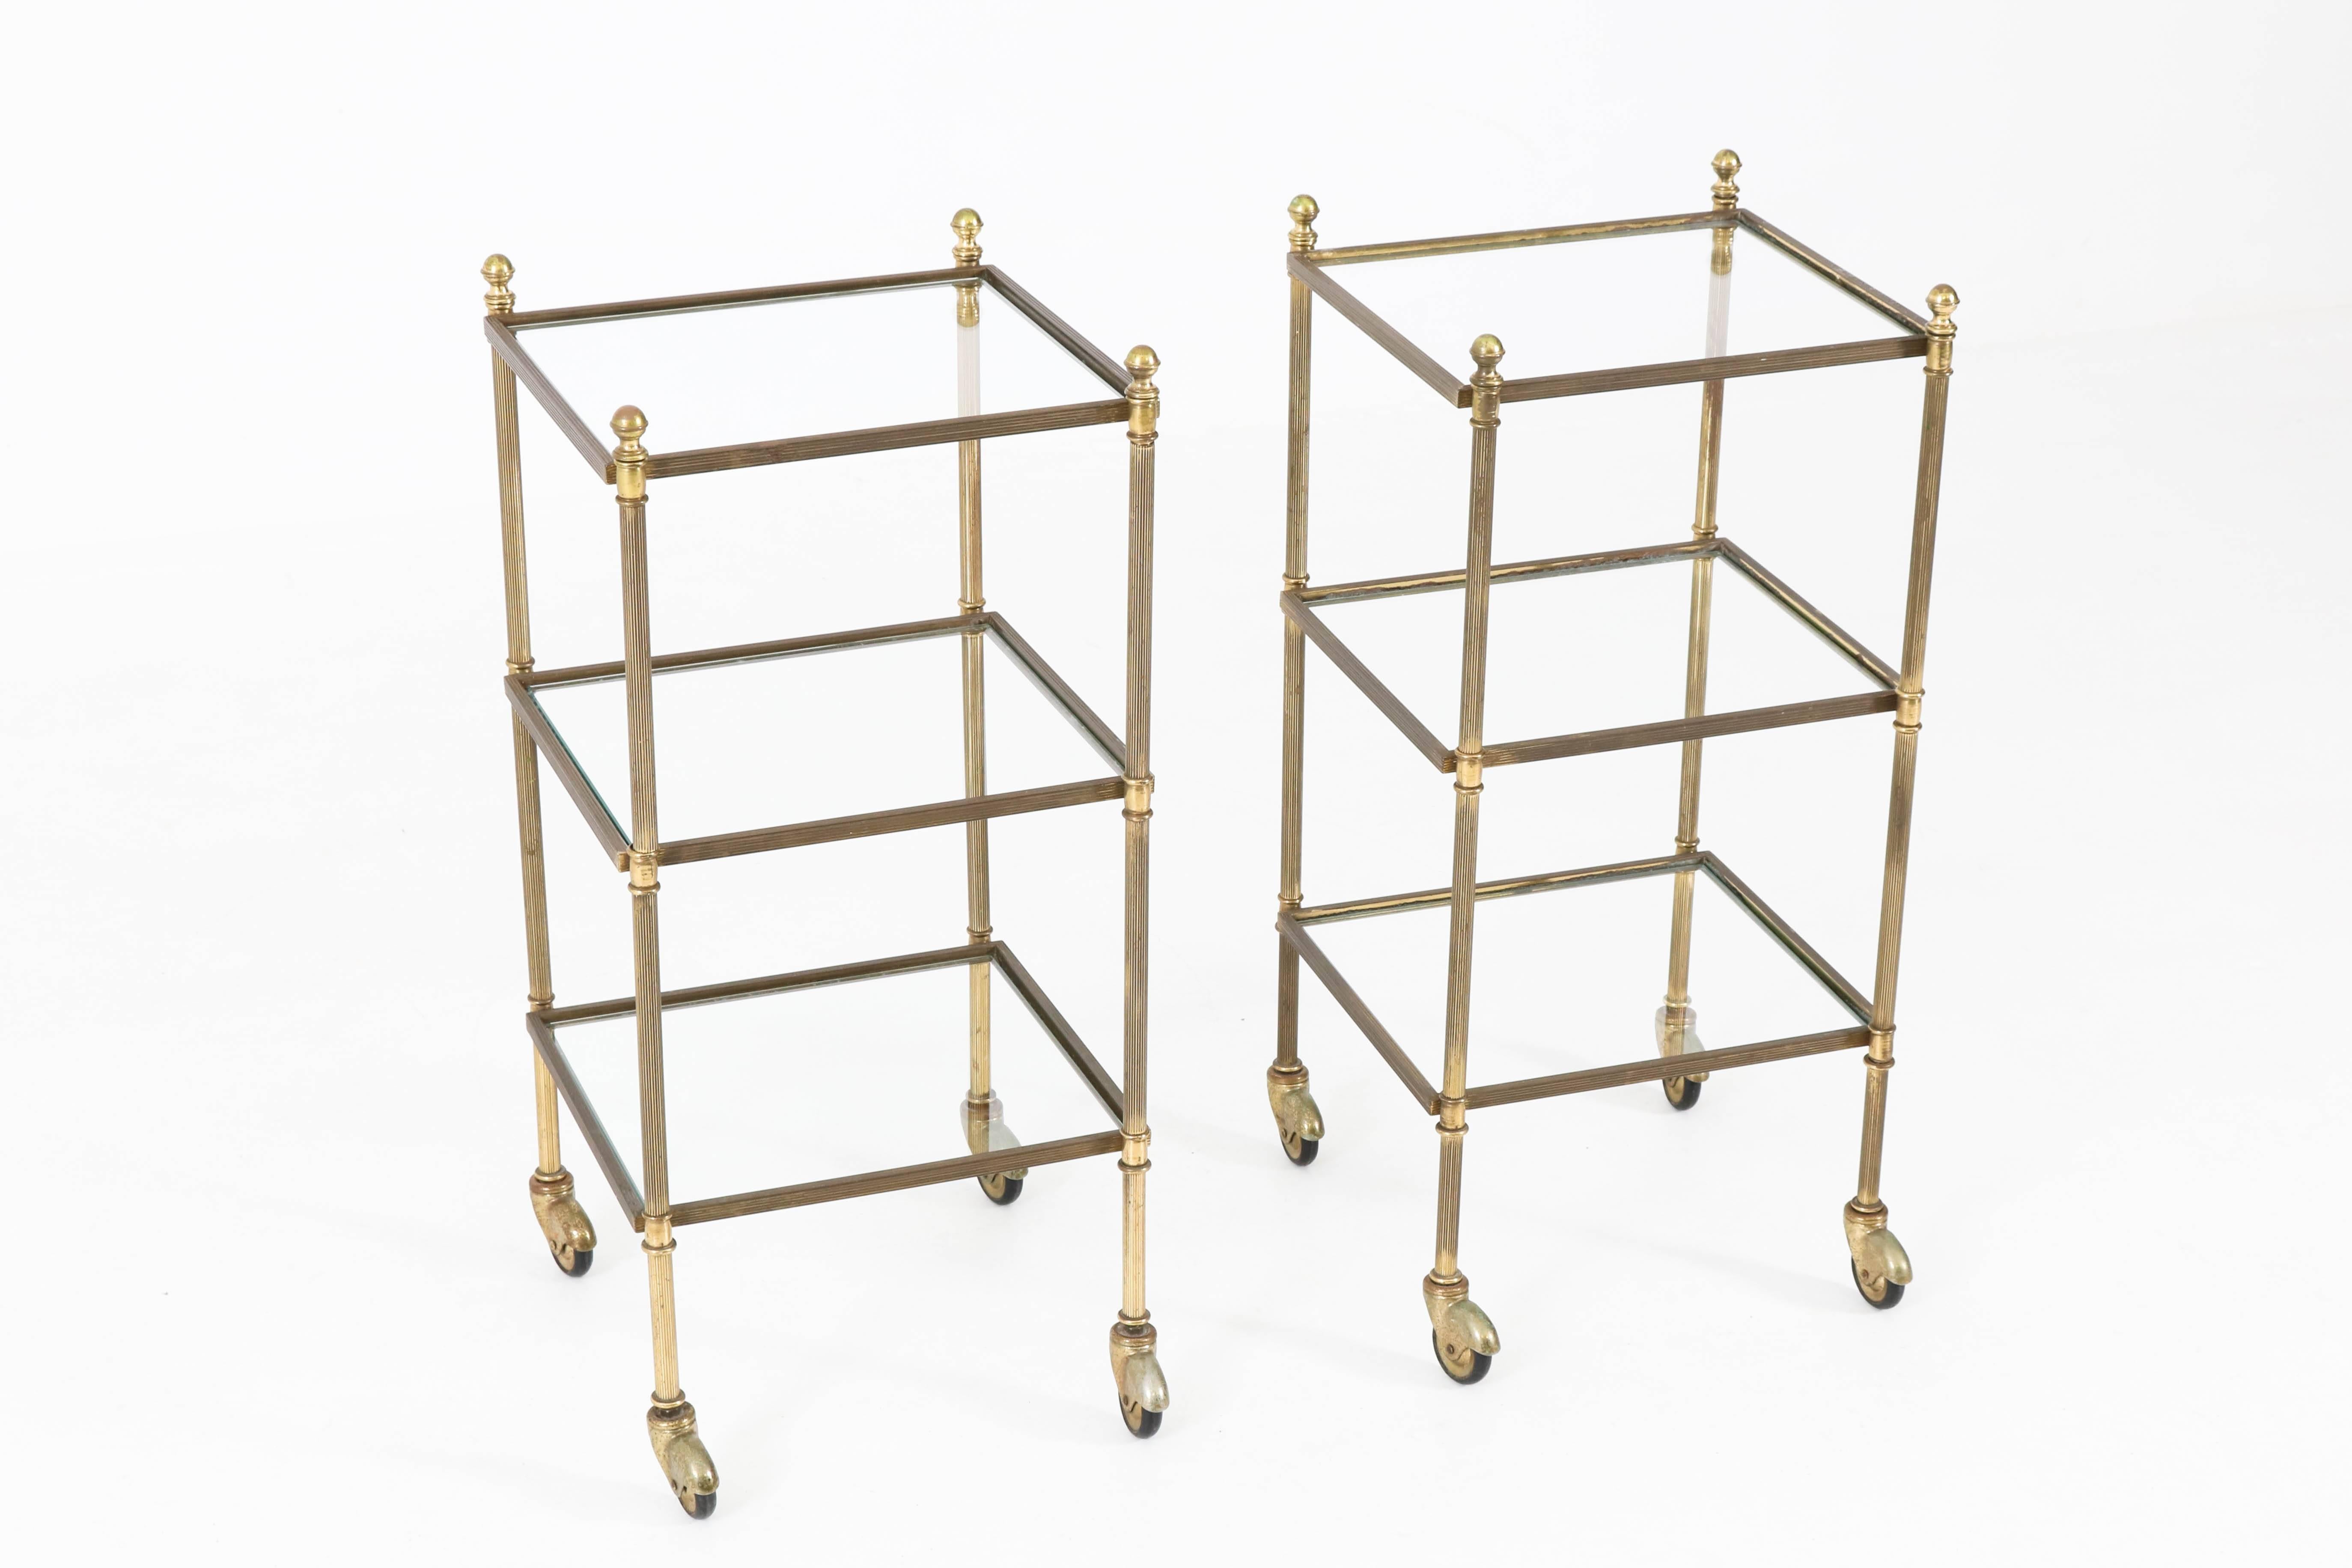 Wonderful pair of Mid-Century Modern Maison Jansen side tables, 1950s.
Solid brass three-tiered end tables with glass tops.
Elegant and functional design from the 1950s.
In good original condition with minor wear consistent with age and